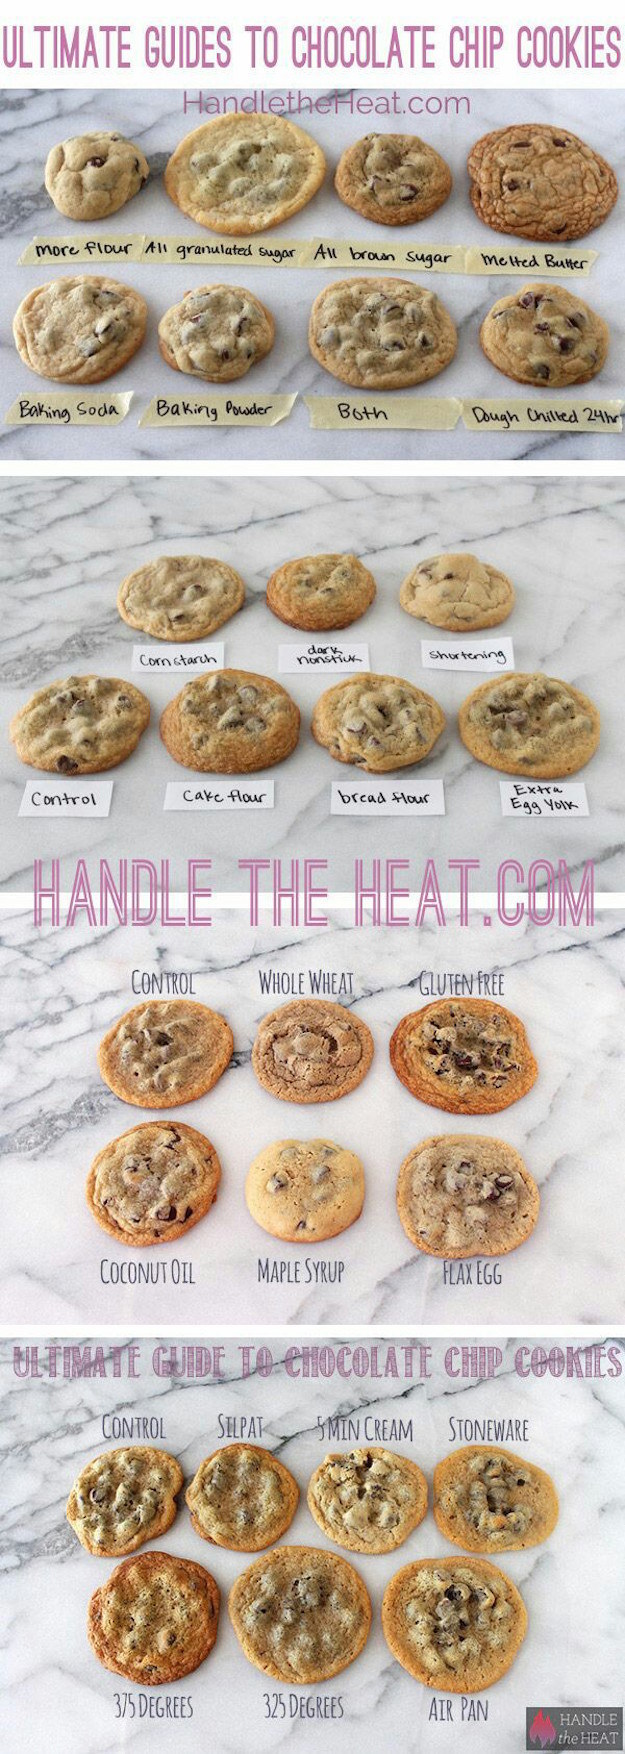 Chocolate Chip Cookie Guide - All Created